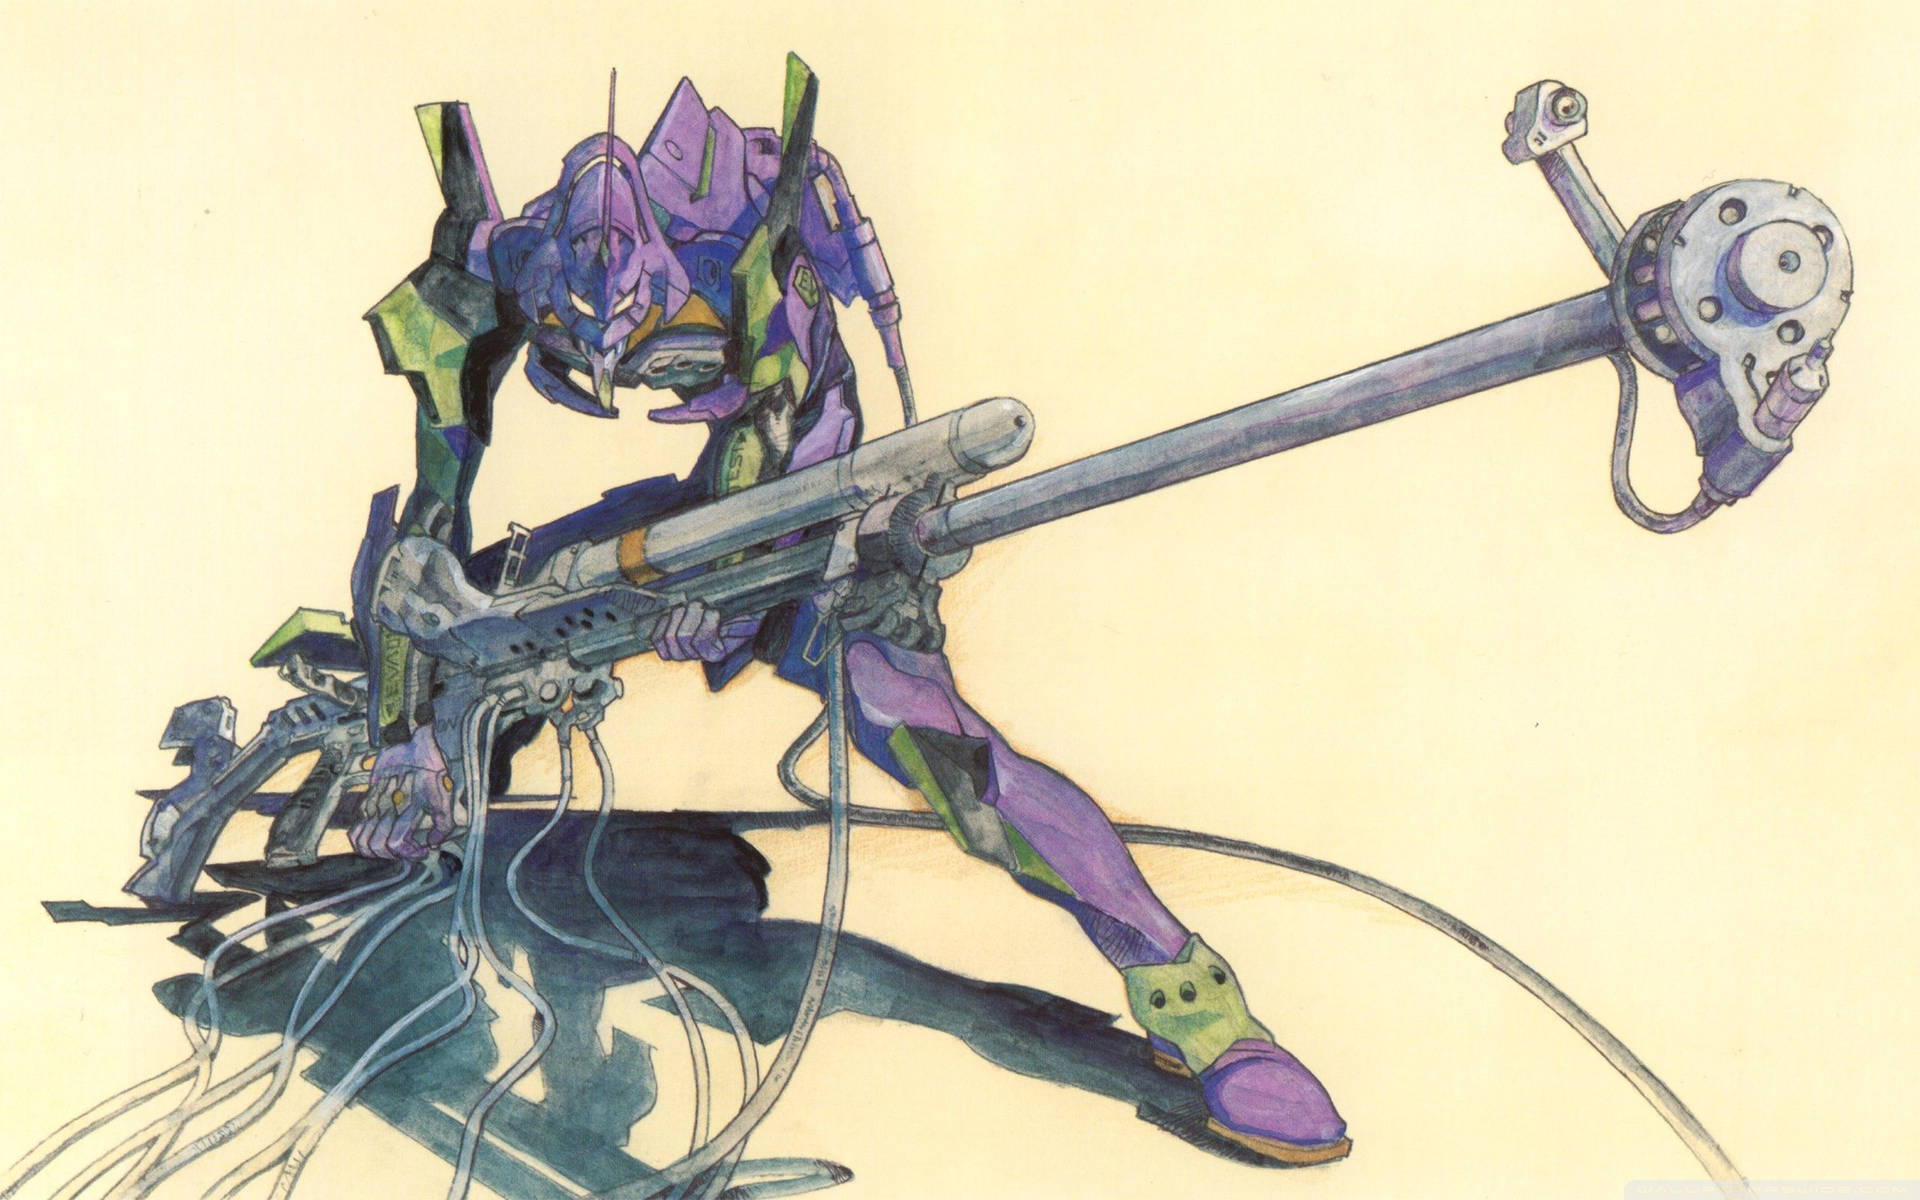 Eva Unit 01 Armed and Ready Wallpaper